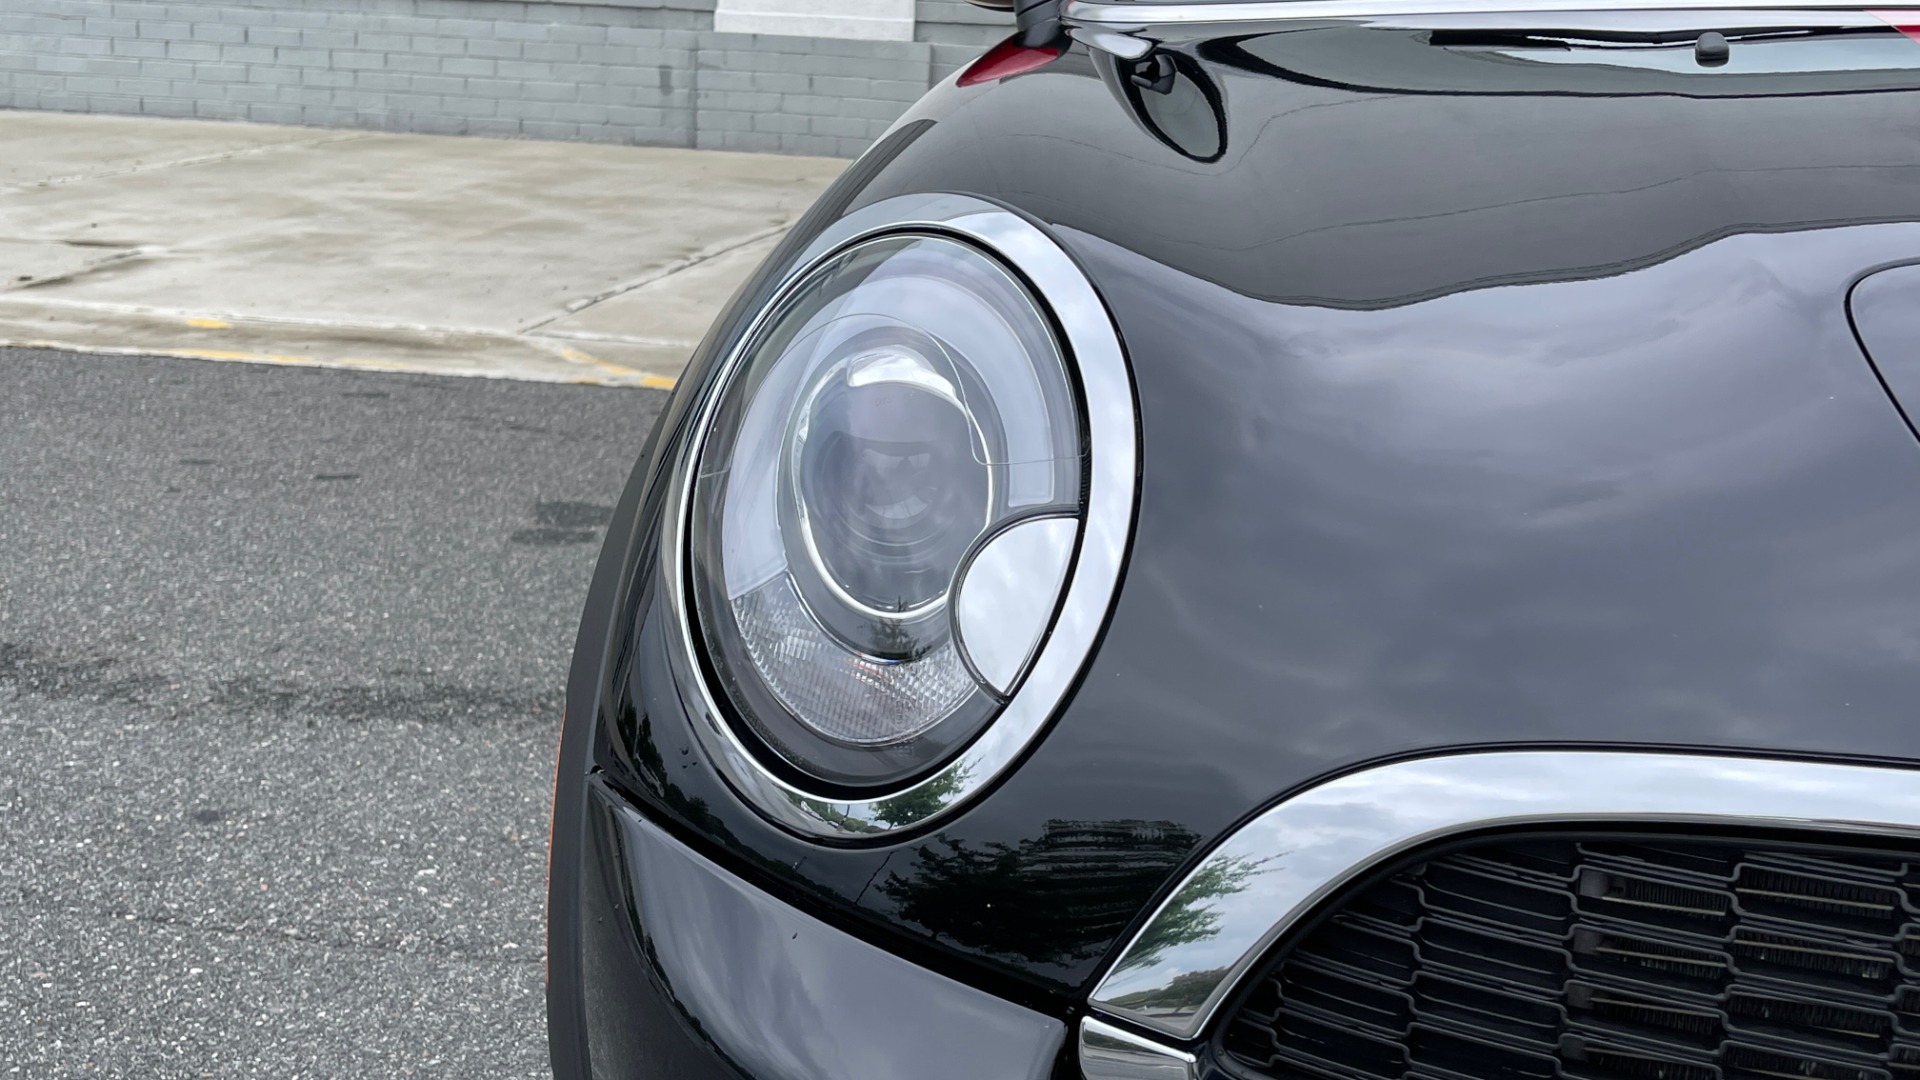 Used 2013 MINI COOPER COUPE JOHN COOPER WORKS / 1.6L TURBO / AUTO / H/K SOUND for sale Sold at Formula Imports in Charlotte NC 28227 12